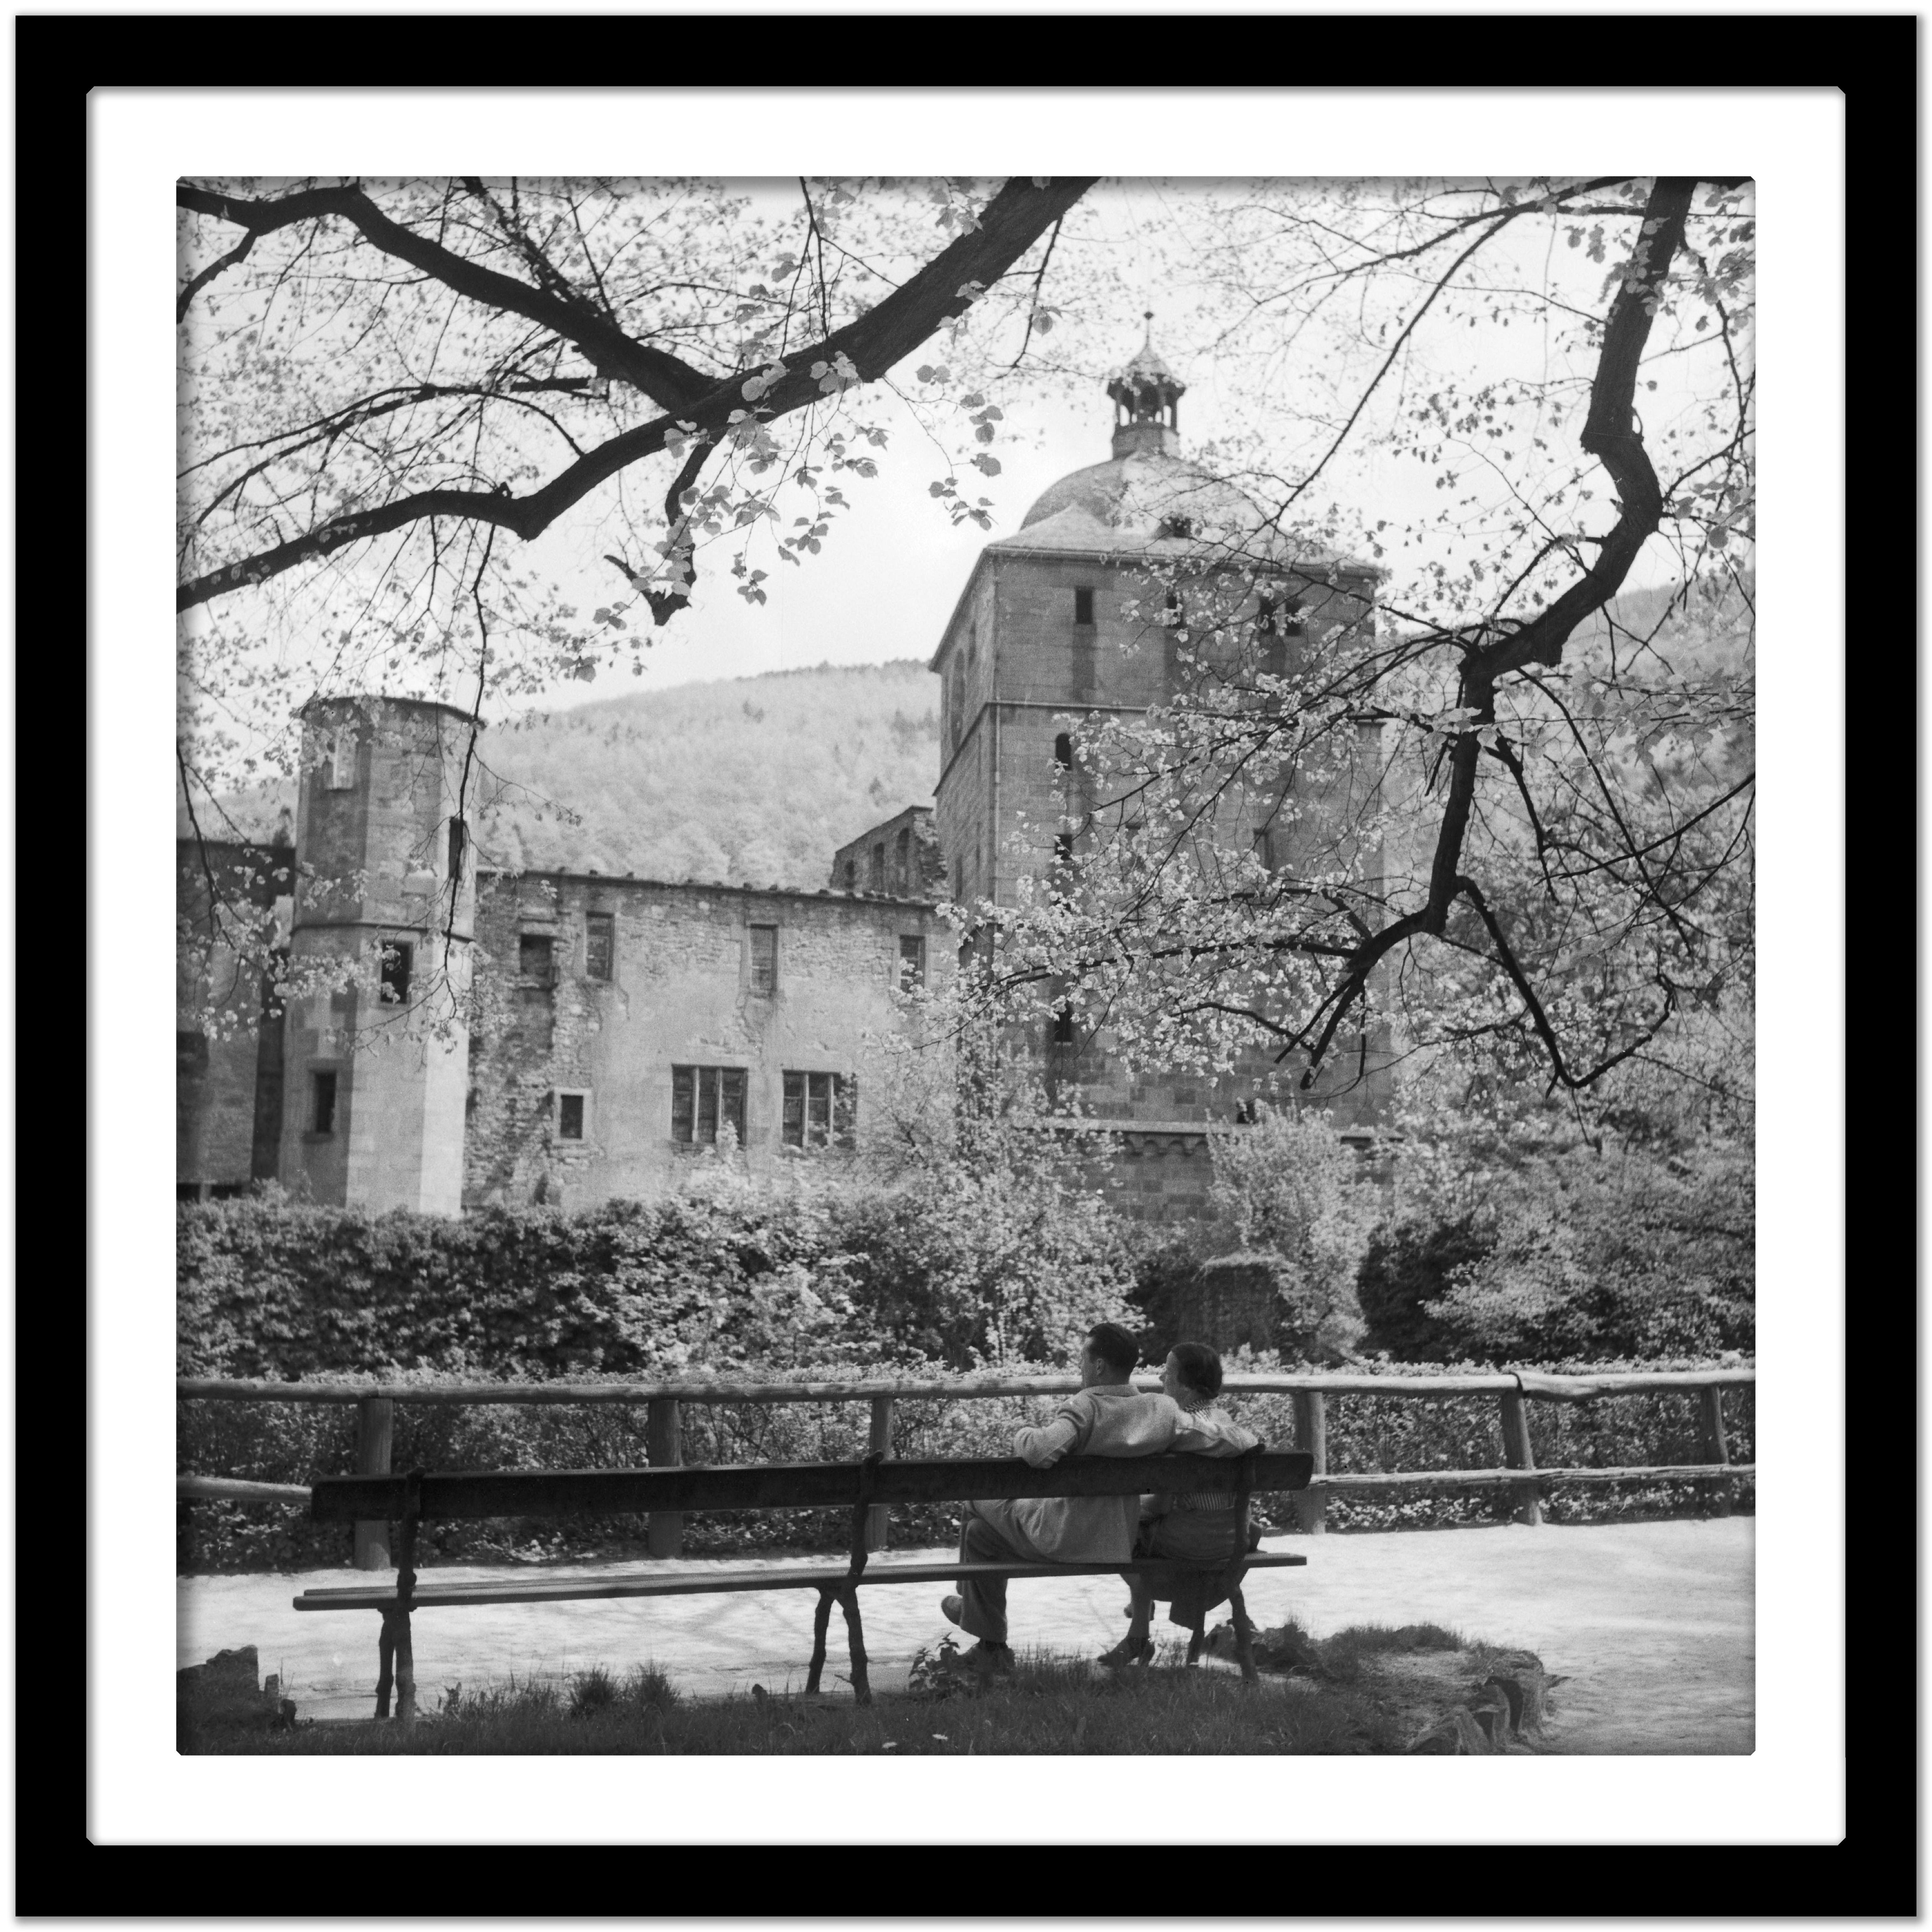 Couple on bench at Heidelberg castle, Germany 1936, Printed Later  - Gray Black and White Photograph by Karl Heinrich Lämmel